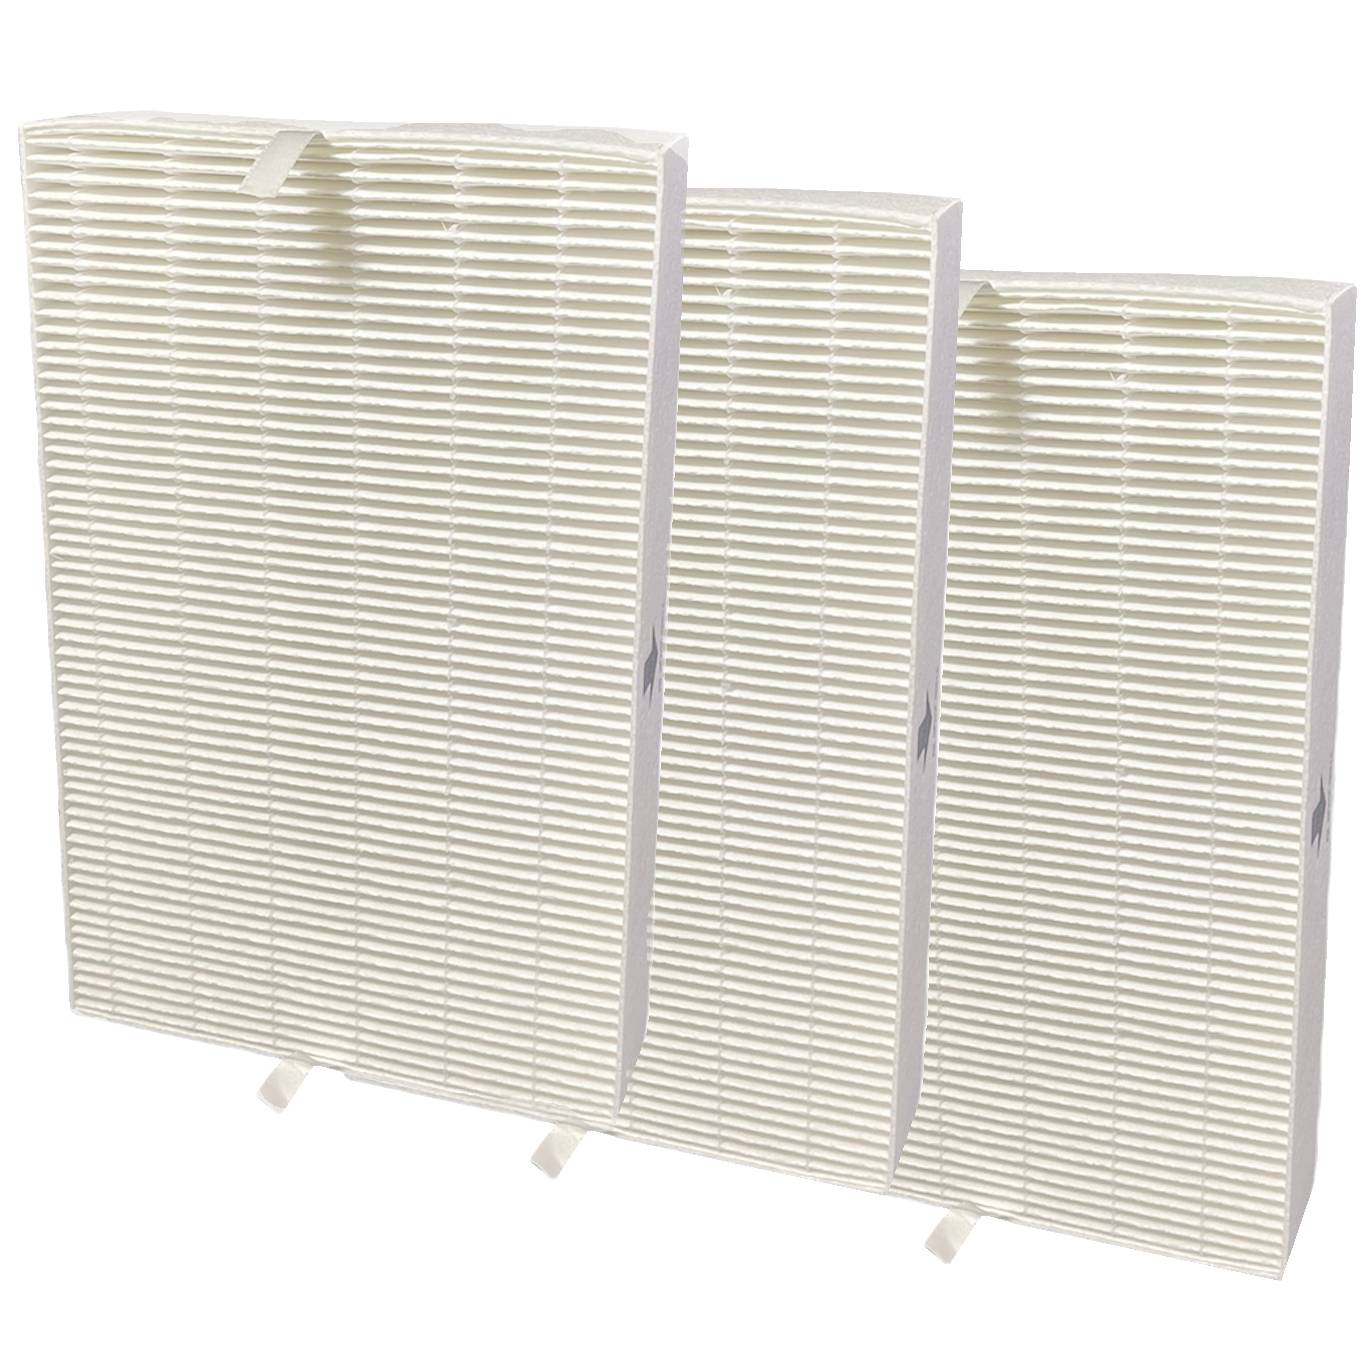 Filters Fast&reg Replacement for Honeywell HRF-R3 - 3-Pack